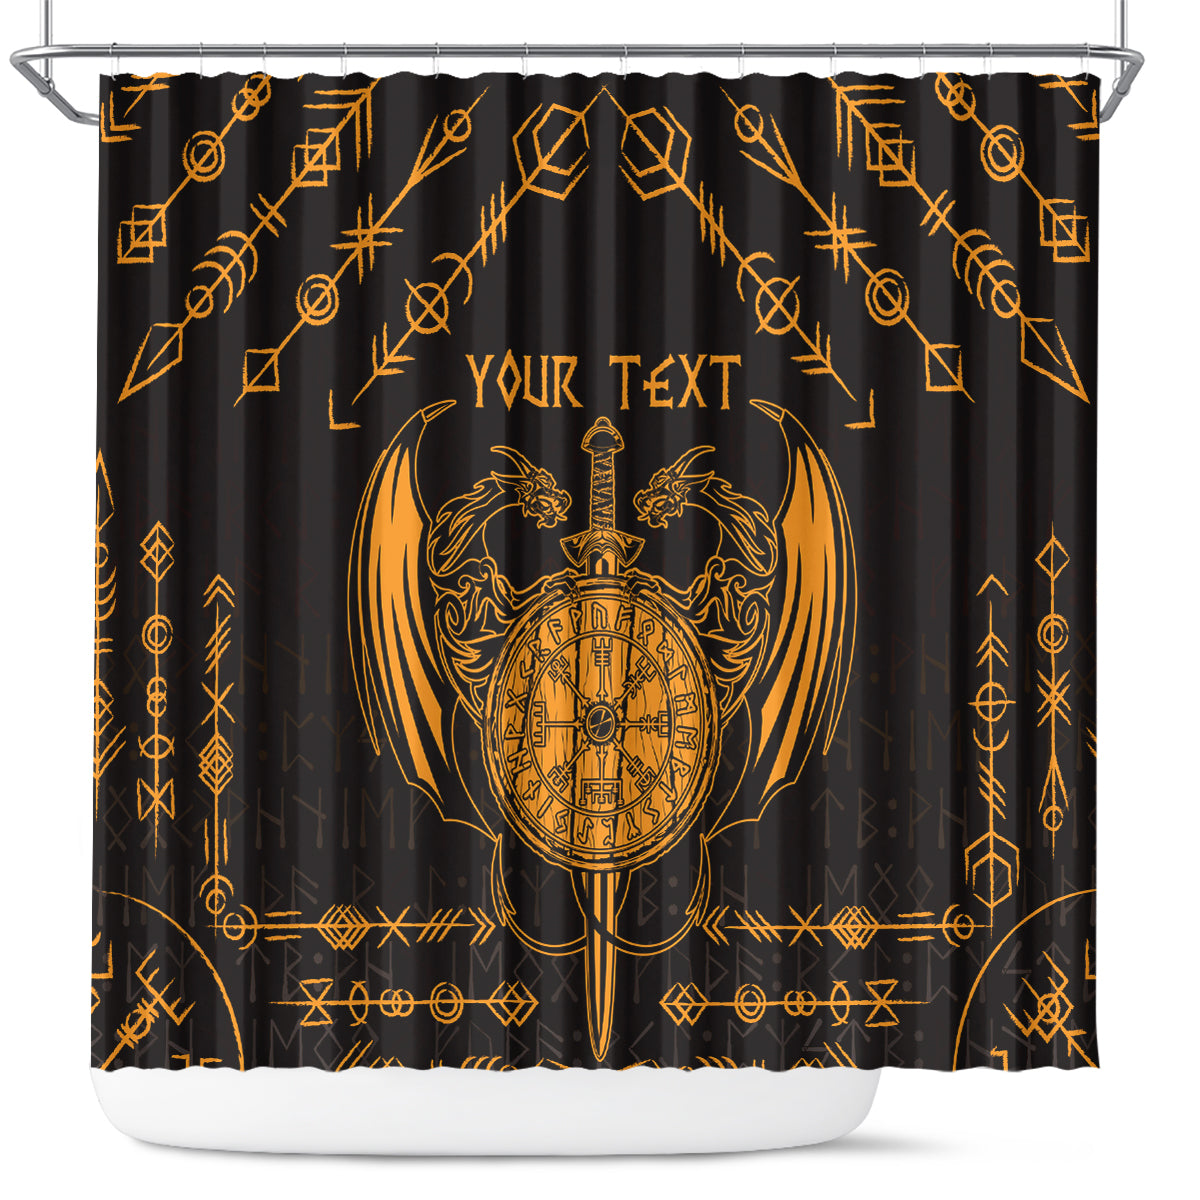 Personalized Viking Dragon Shower Curtain with Sword Gold Scandinavian Tattoo